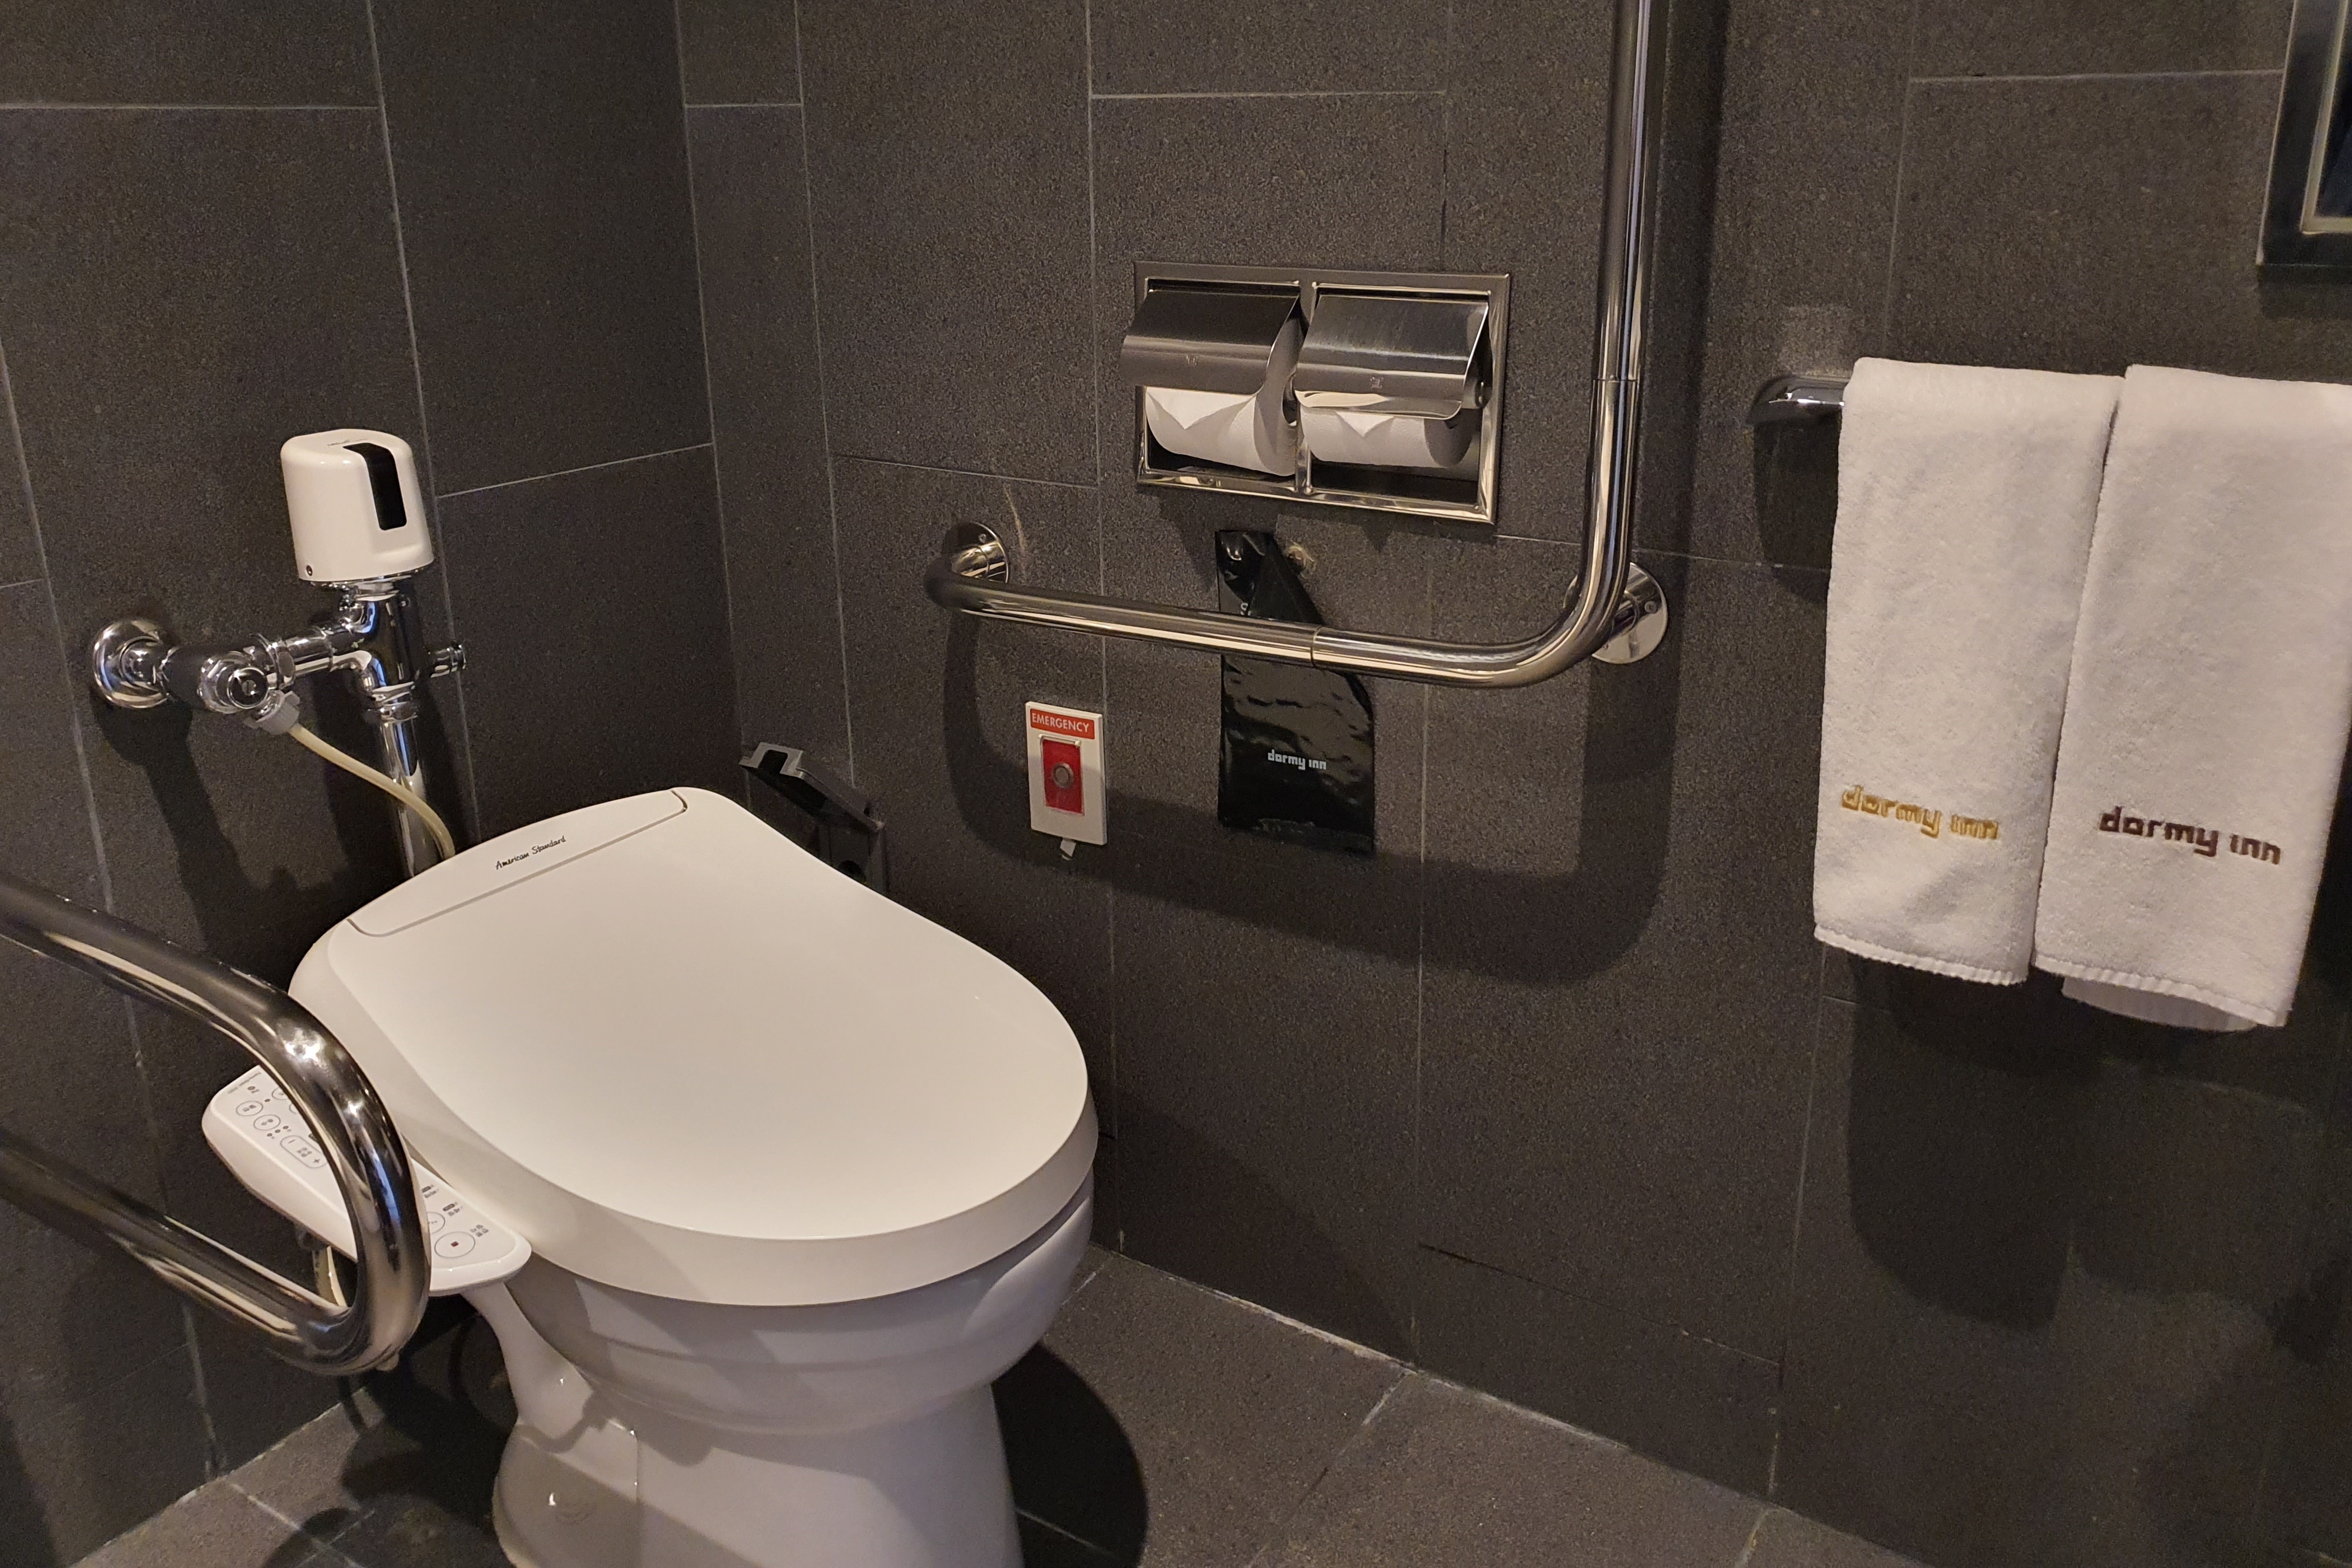 Accessible guesroom bathroom0 : A toilet equipped with a safety bar 